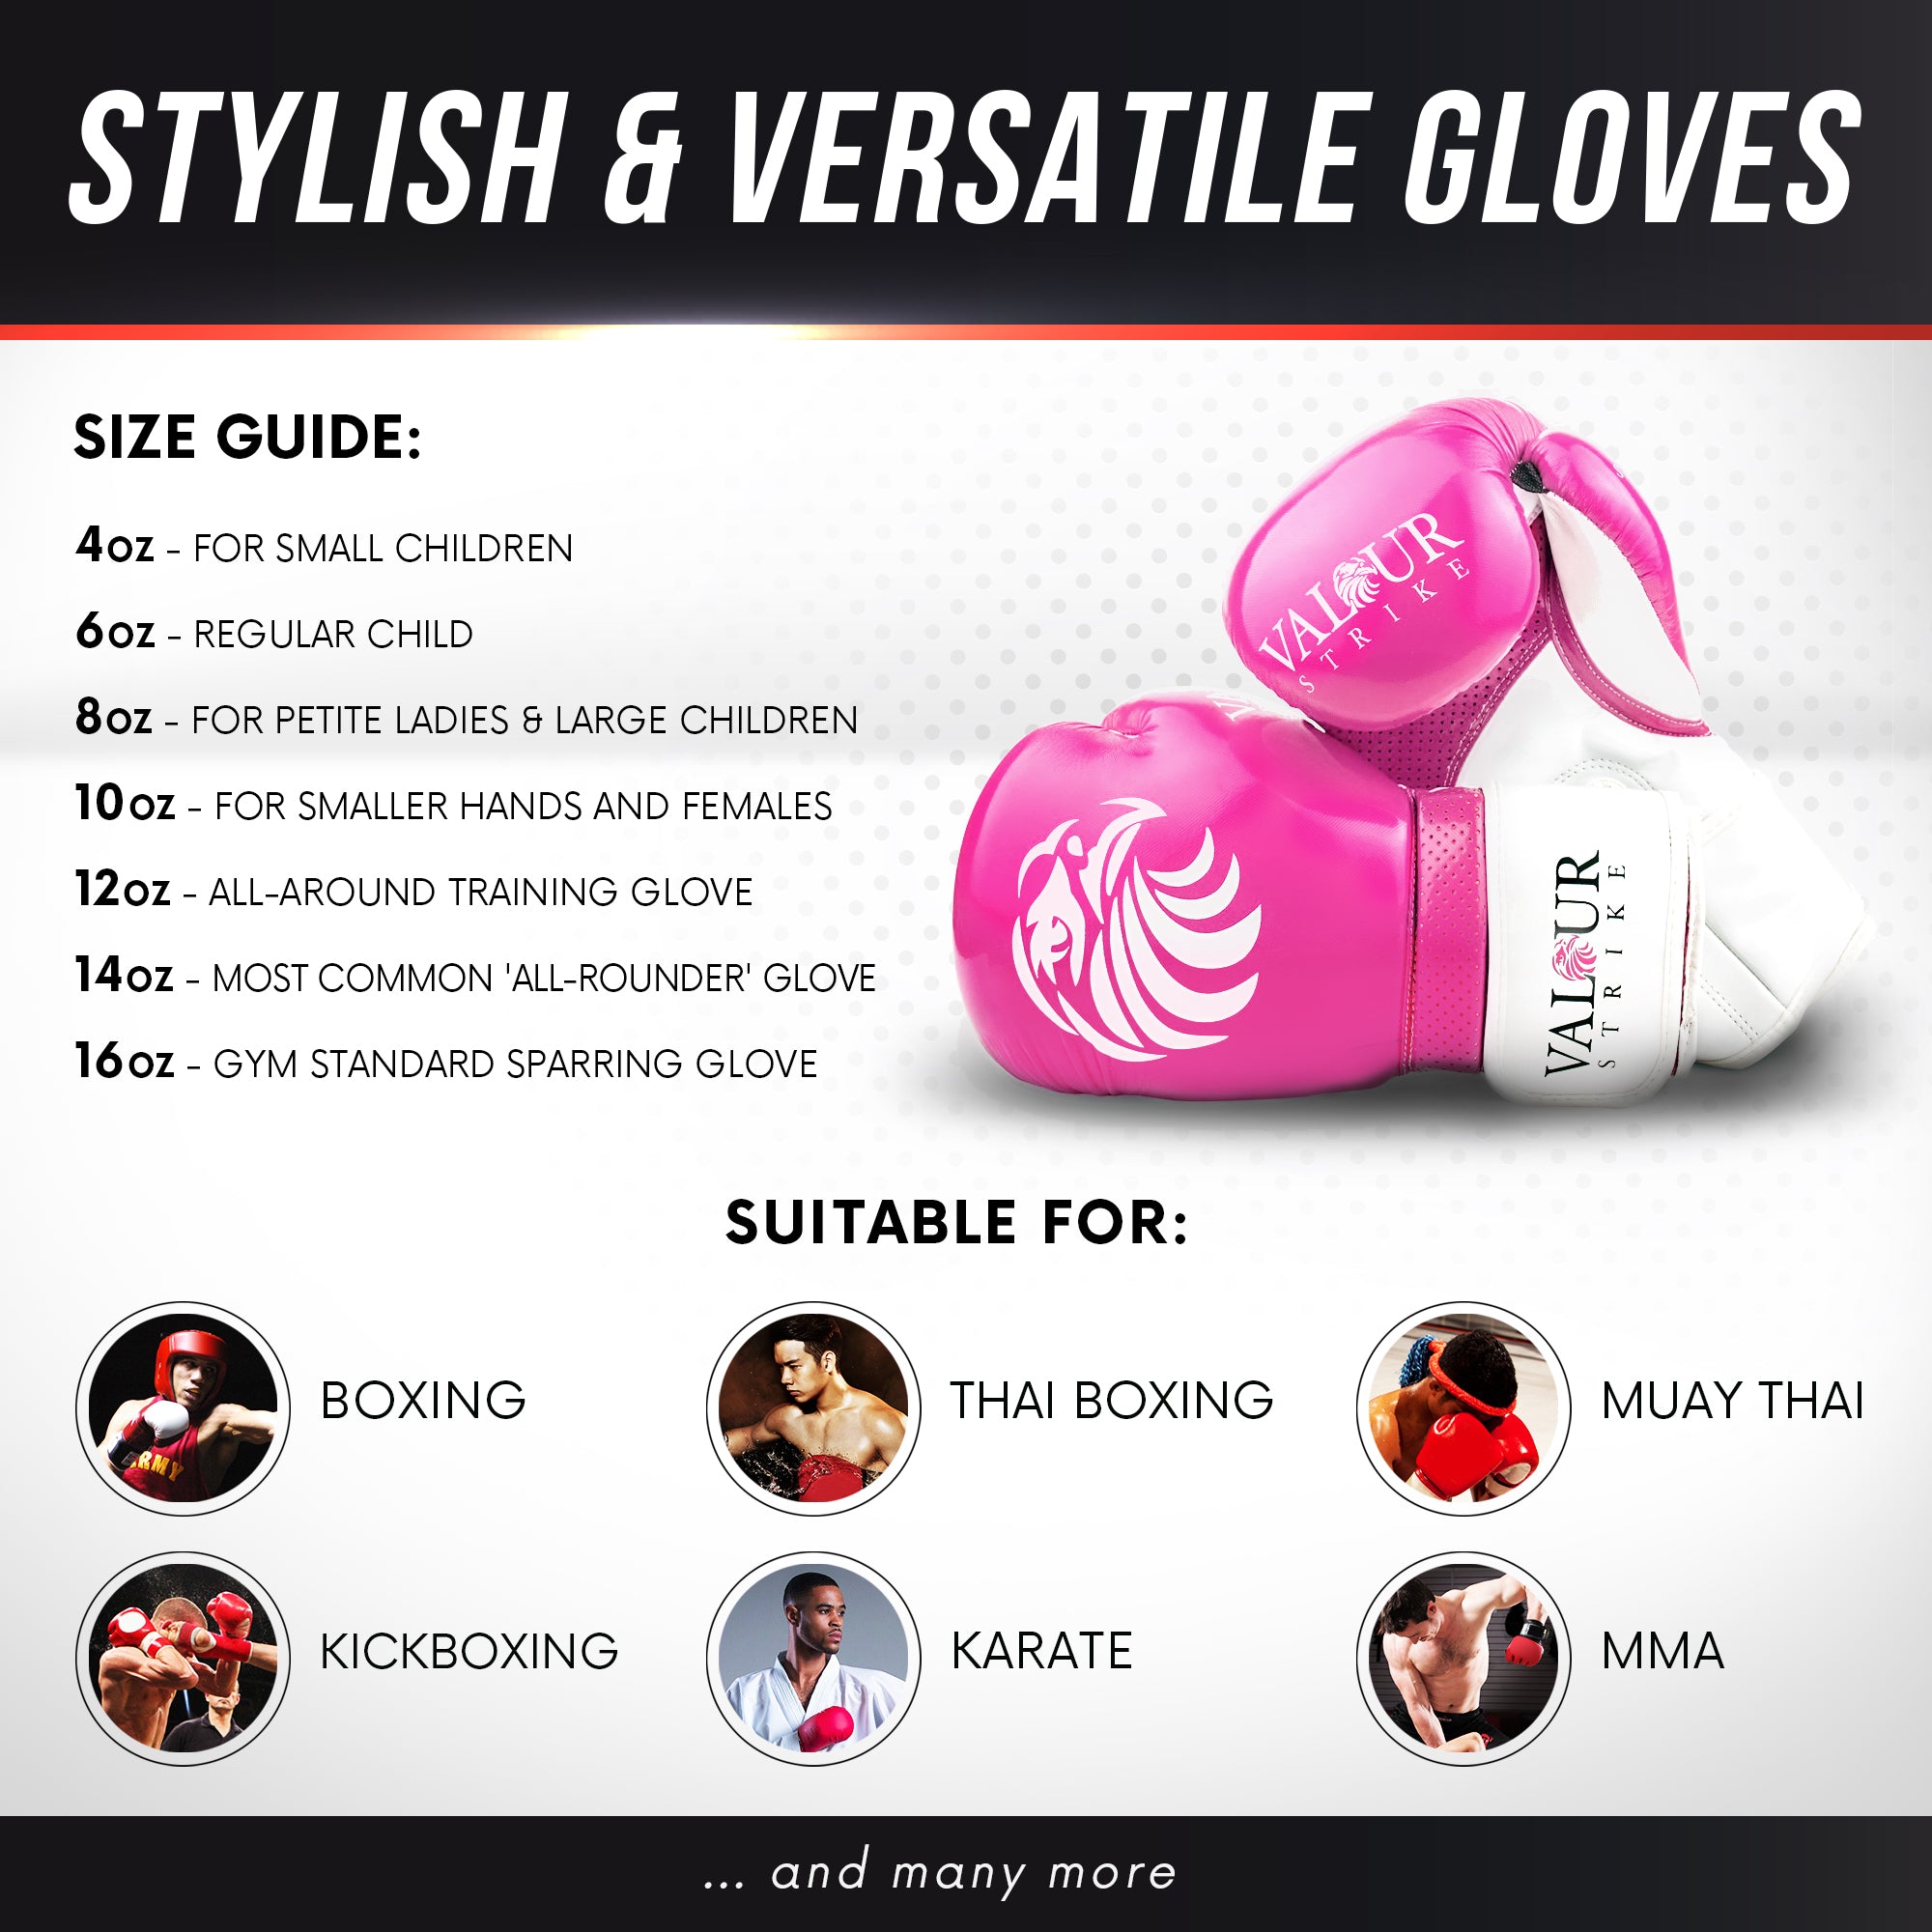 Ladies boxing glove size guide